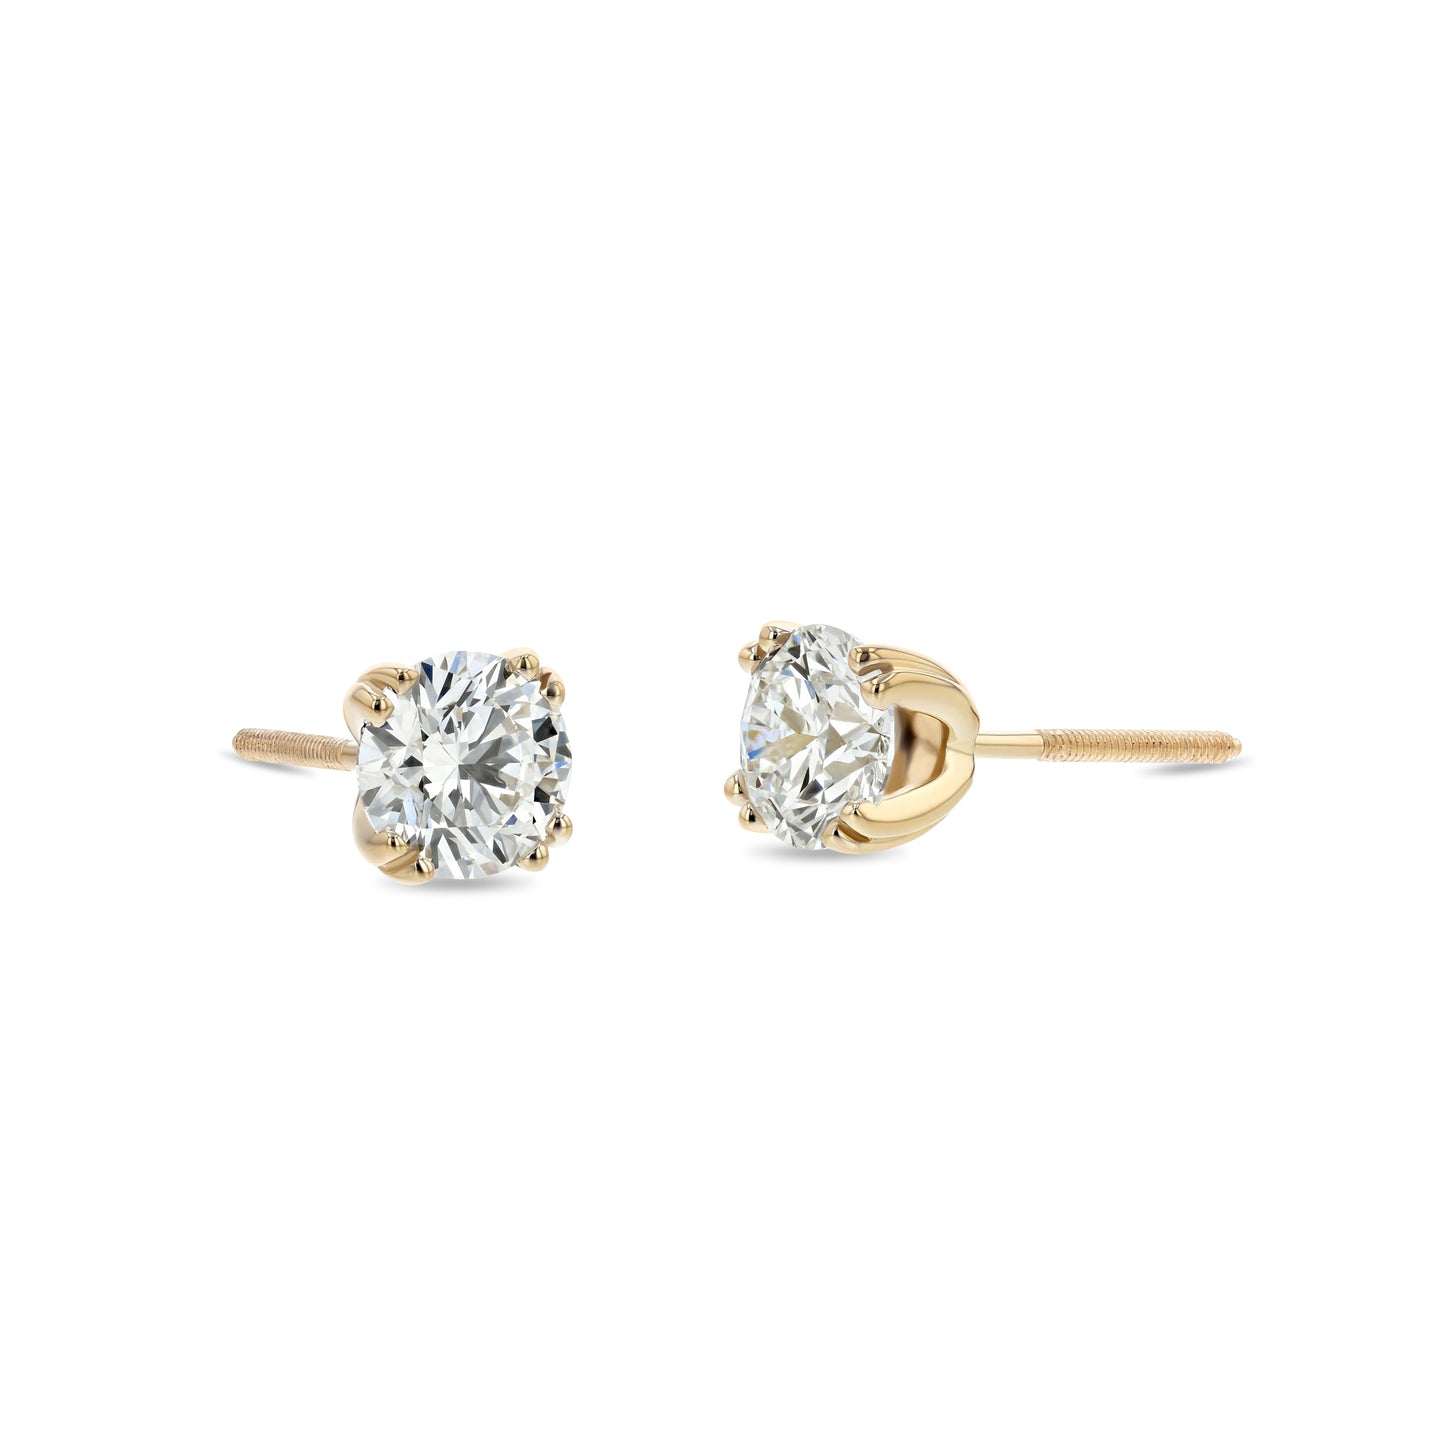 14k Yellow Gold Double Prong Round Diamond Stud Earrings 1ctw (5.2mm Ea), G Color, Si3 Clarity